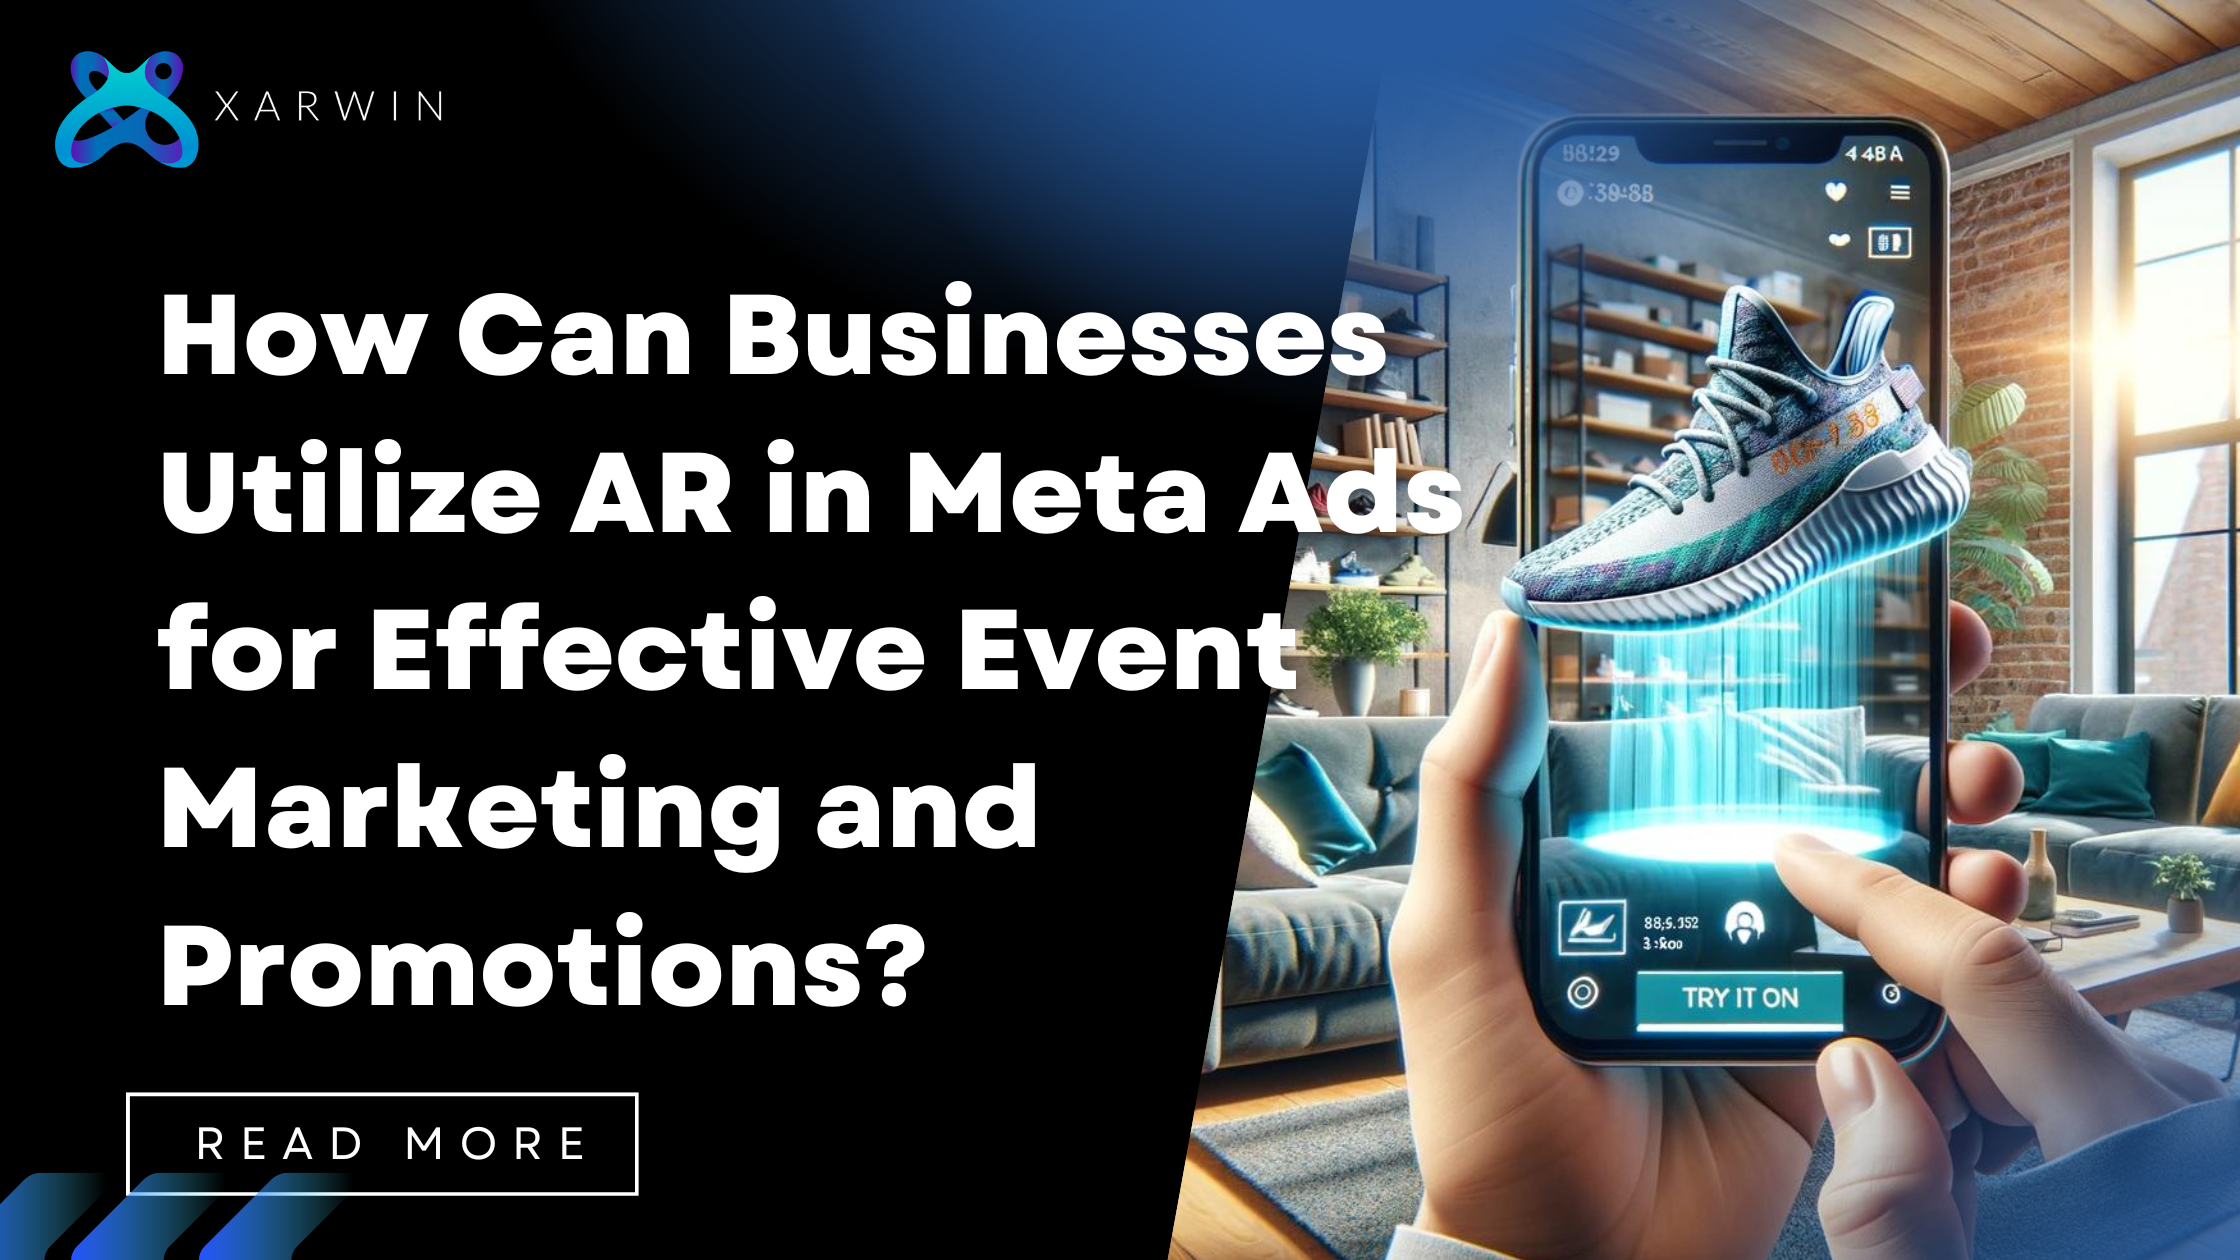 How Can Businesses Utilize AR in Meta Ads for Effective Event Marketing and Promotions